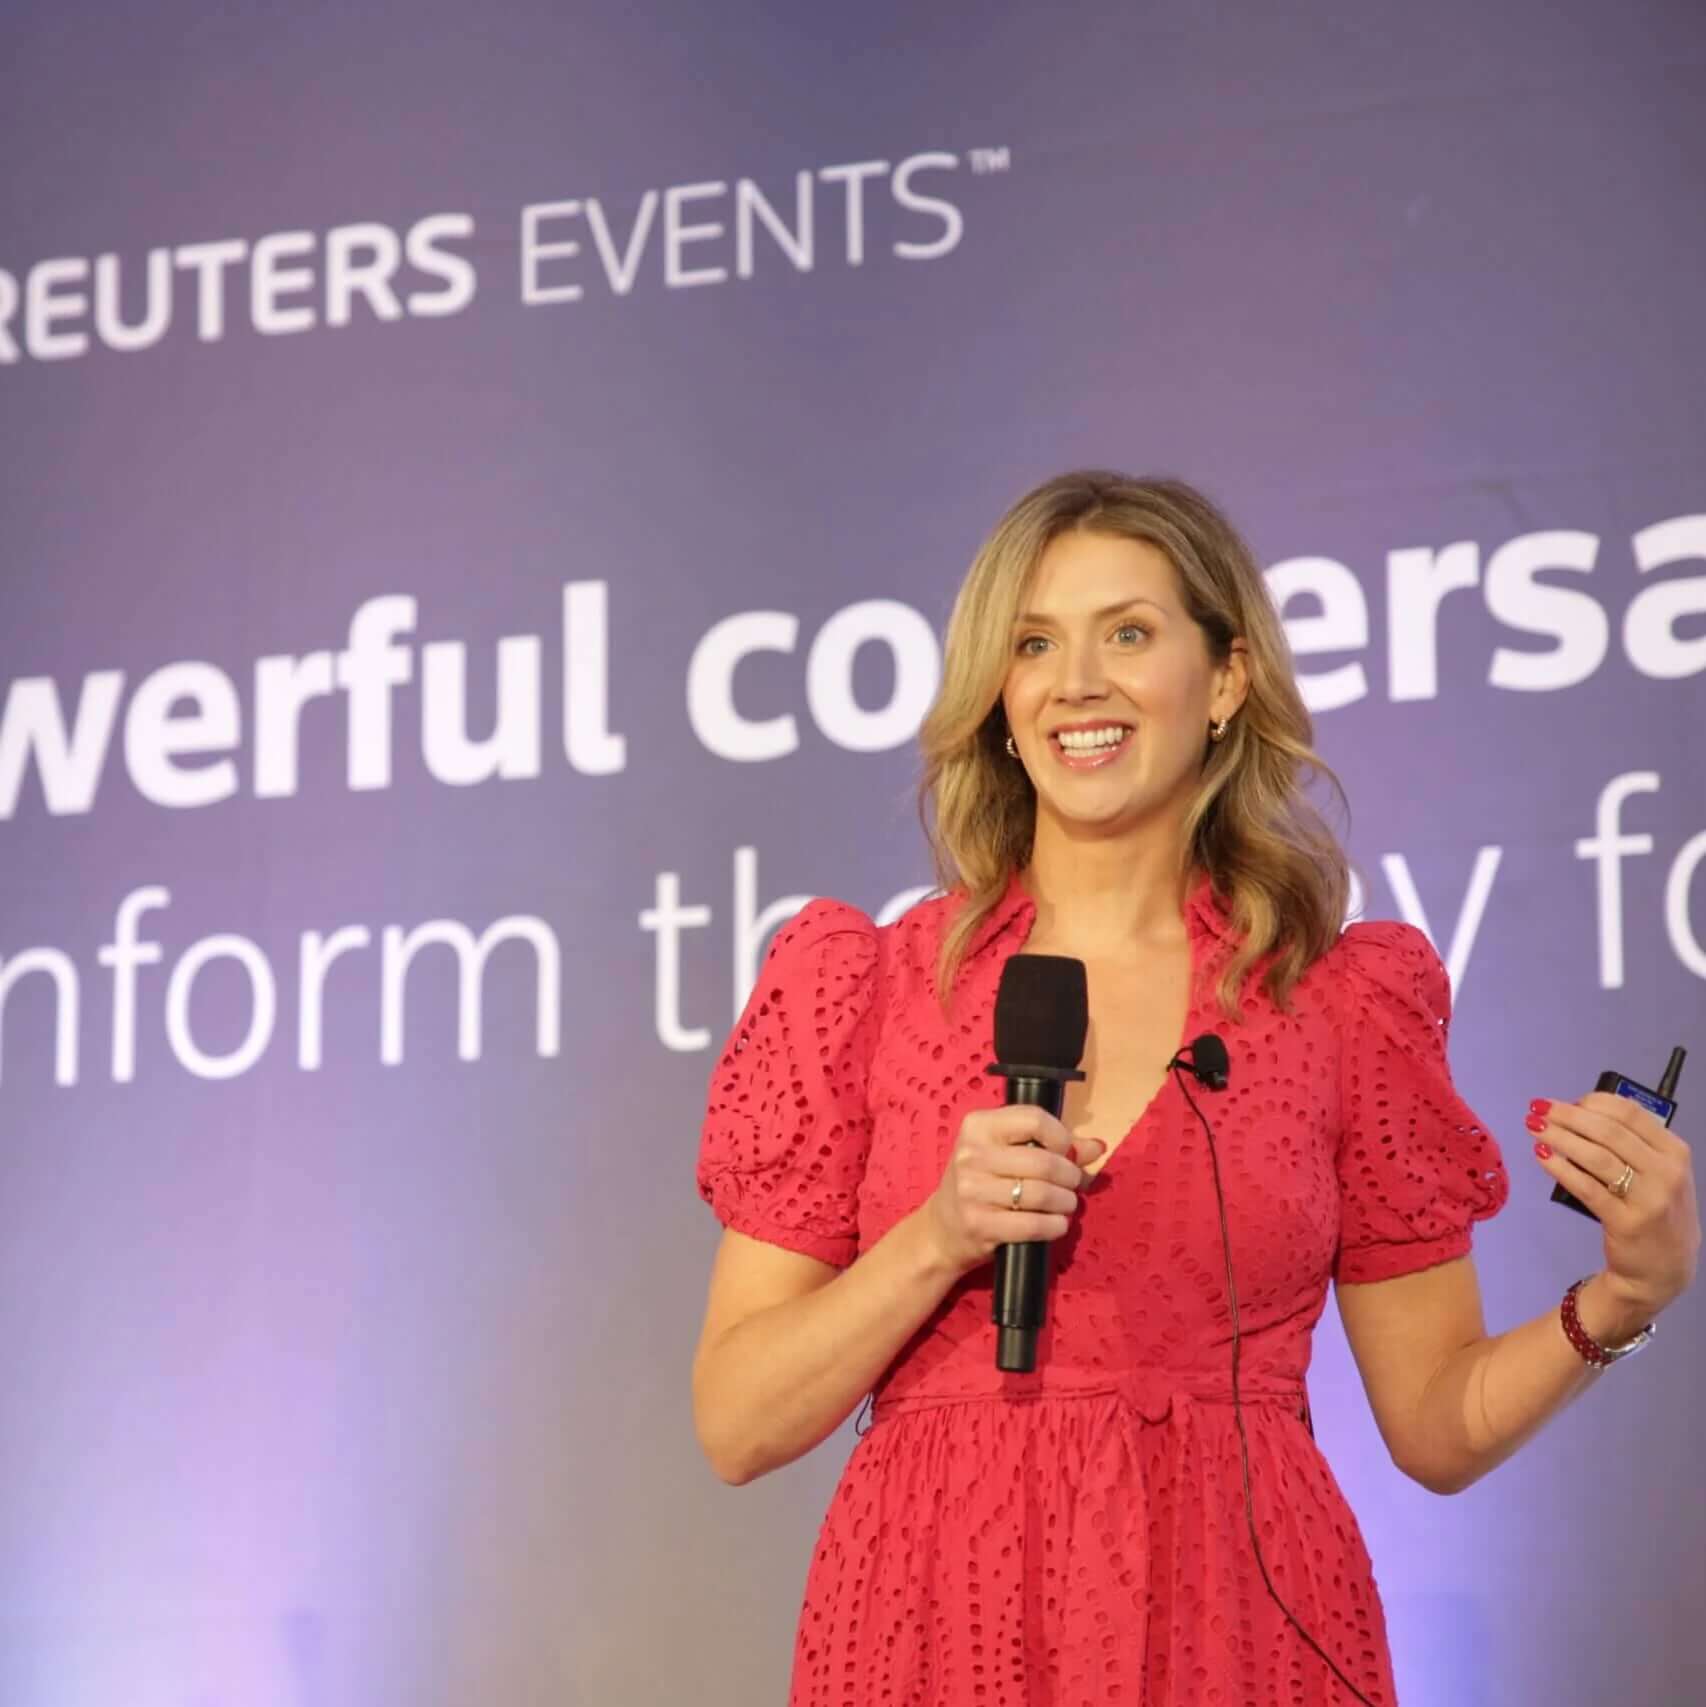 Shannon Reedy presenting at Reuters conference